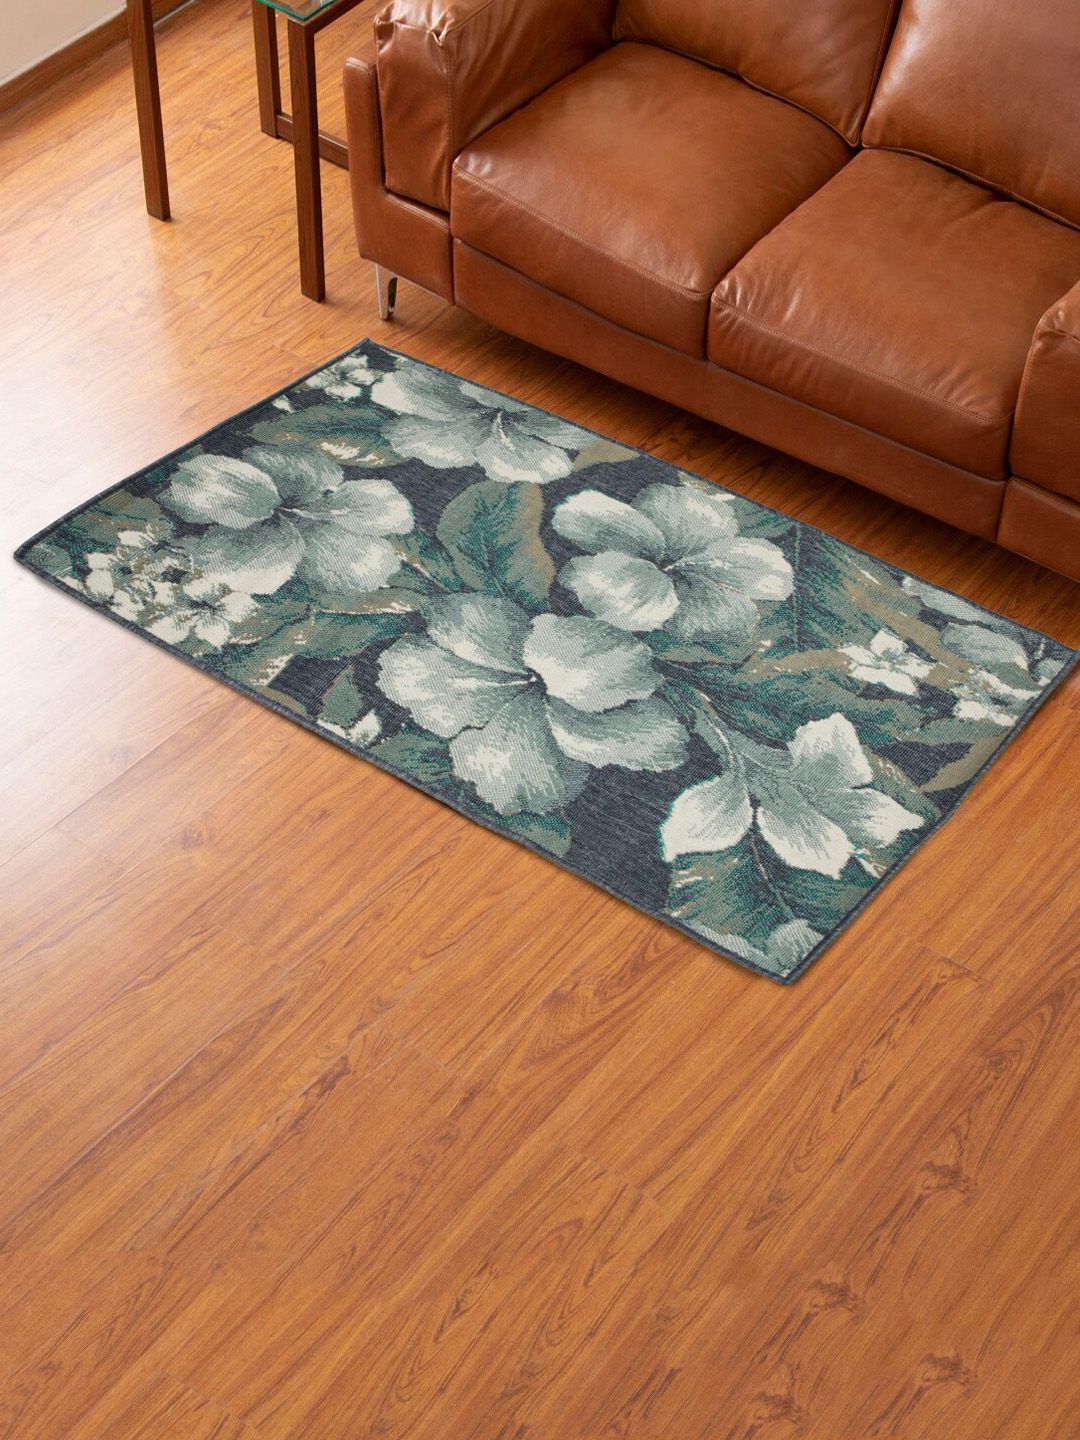 Home Centre Teal Floral Printed Woven Carpet Price in India